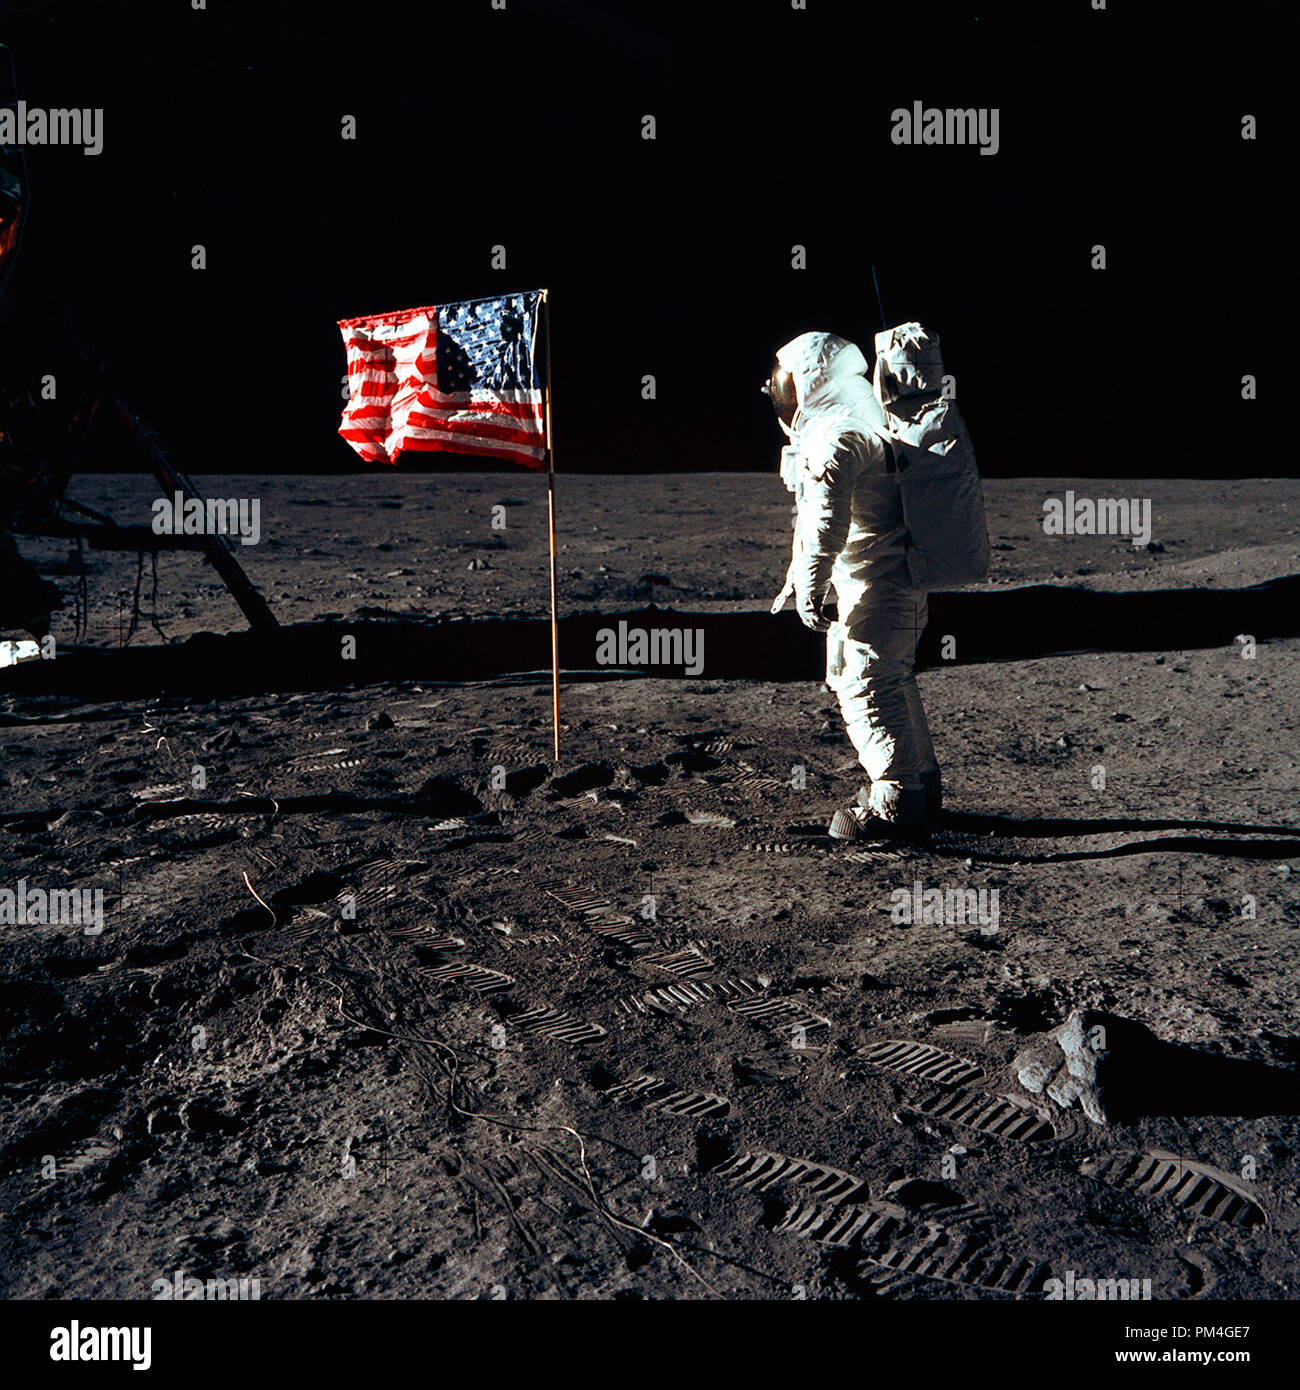 Astronaut Buzz Aldrin, lunar module pilot of the first lunar landing mission, poses for a photograph beside the deployed United States flag during an Apollo 11 Extravehicular Activity (EVA) on the lunar surface. The Lunar Module (LM) is on the left, and the footprints of the astronauts are clearly visible in the soil of the Moon. Astronaut Neil A. Armstrong, commander, took this picture with a 70mm Hasselblad lunar surface camera, July 20, 1969.  File Reference # 1001 012THA Stock Photo